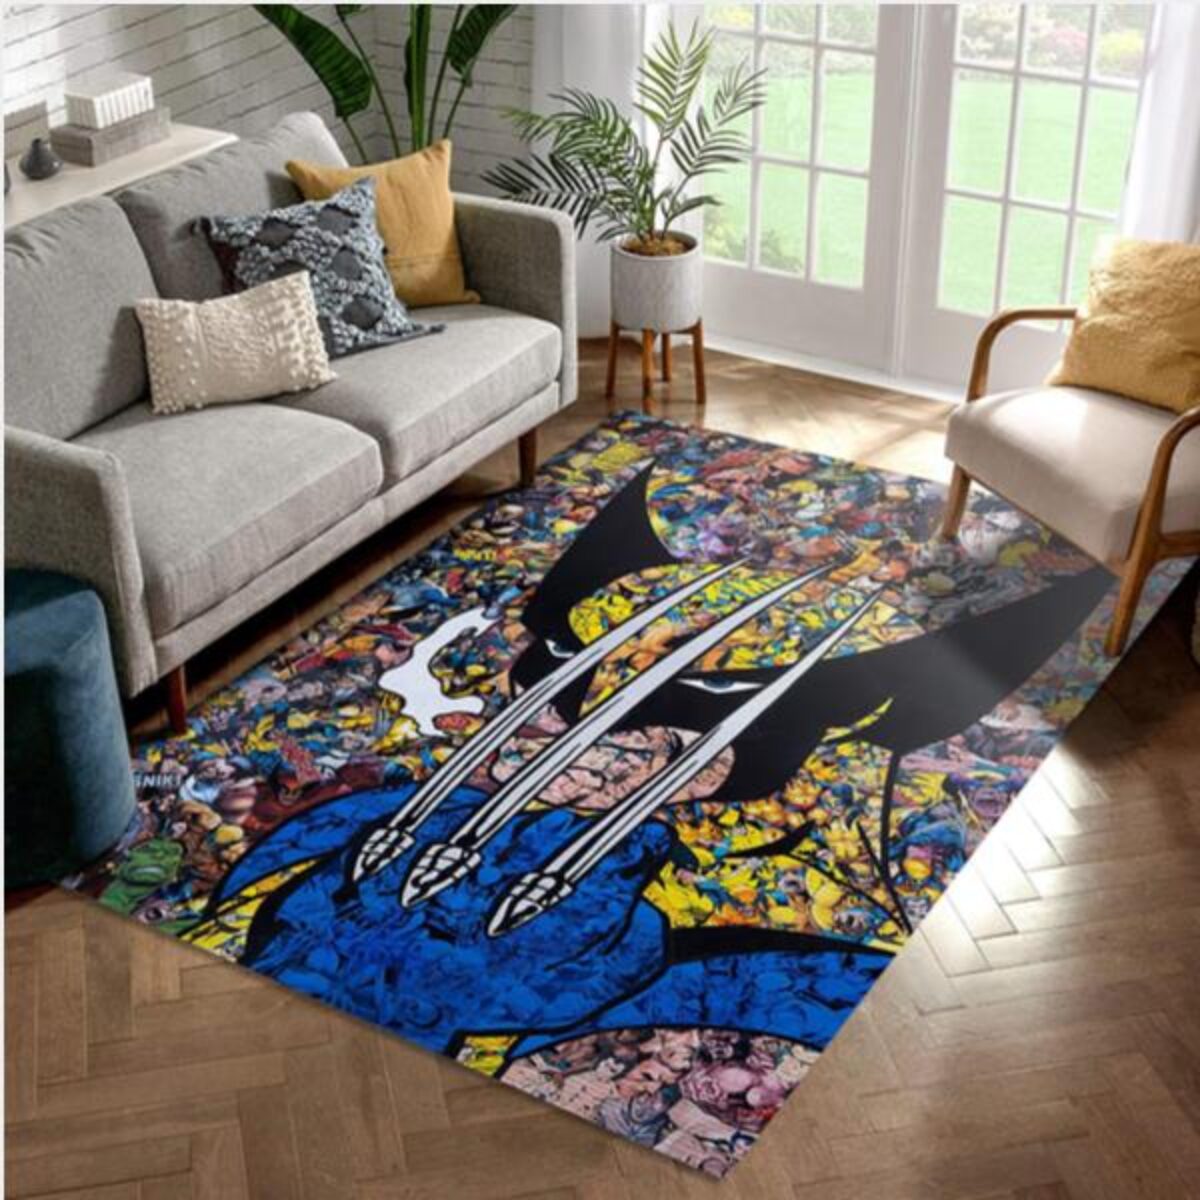 Golden State Warriors Full For Men And Women 3D Hoodie - Peto Rugs